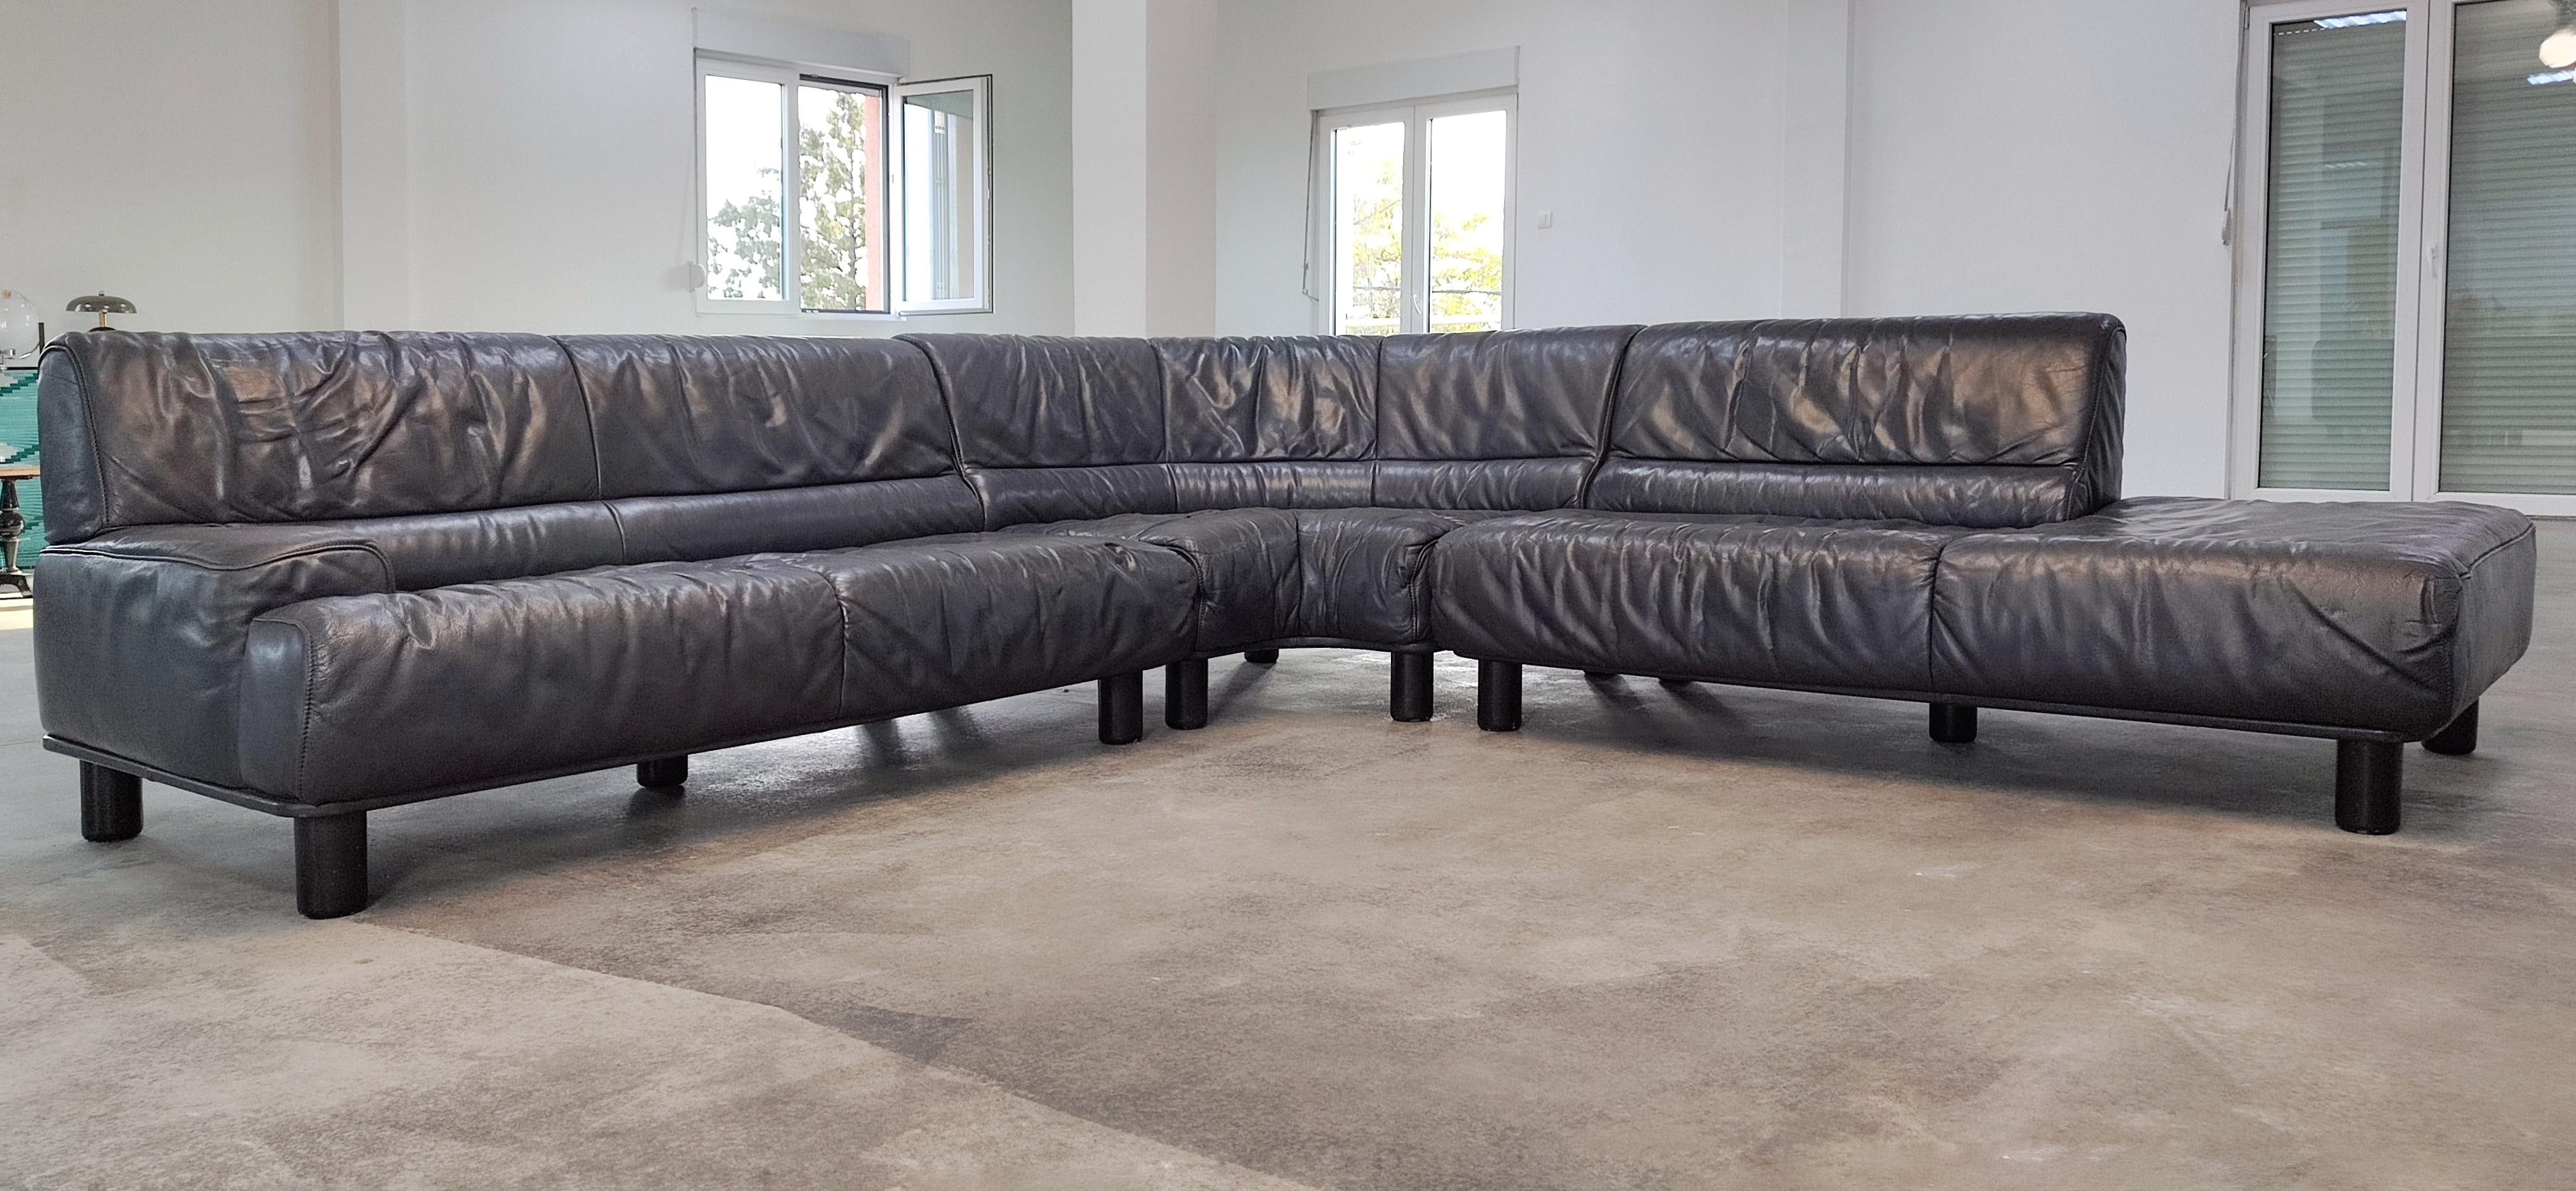 In this listing you will find a gorgeous Sectional Leather Sofa, model DS-18, designed and manufactured by De Sede Switzerland. Crafted with the utmost attention to detail, this leather sectional is the epitome of fine European craftsmanship. Its